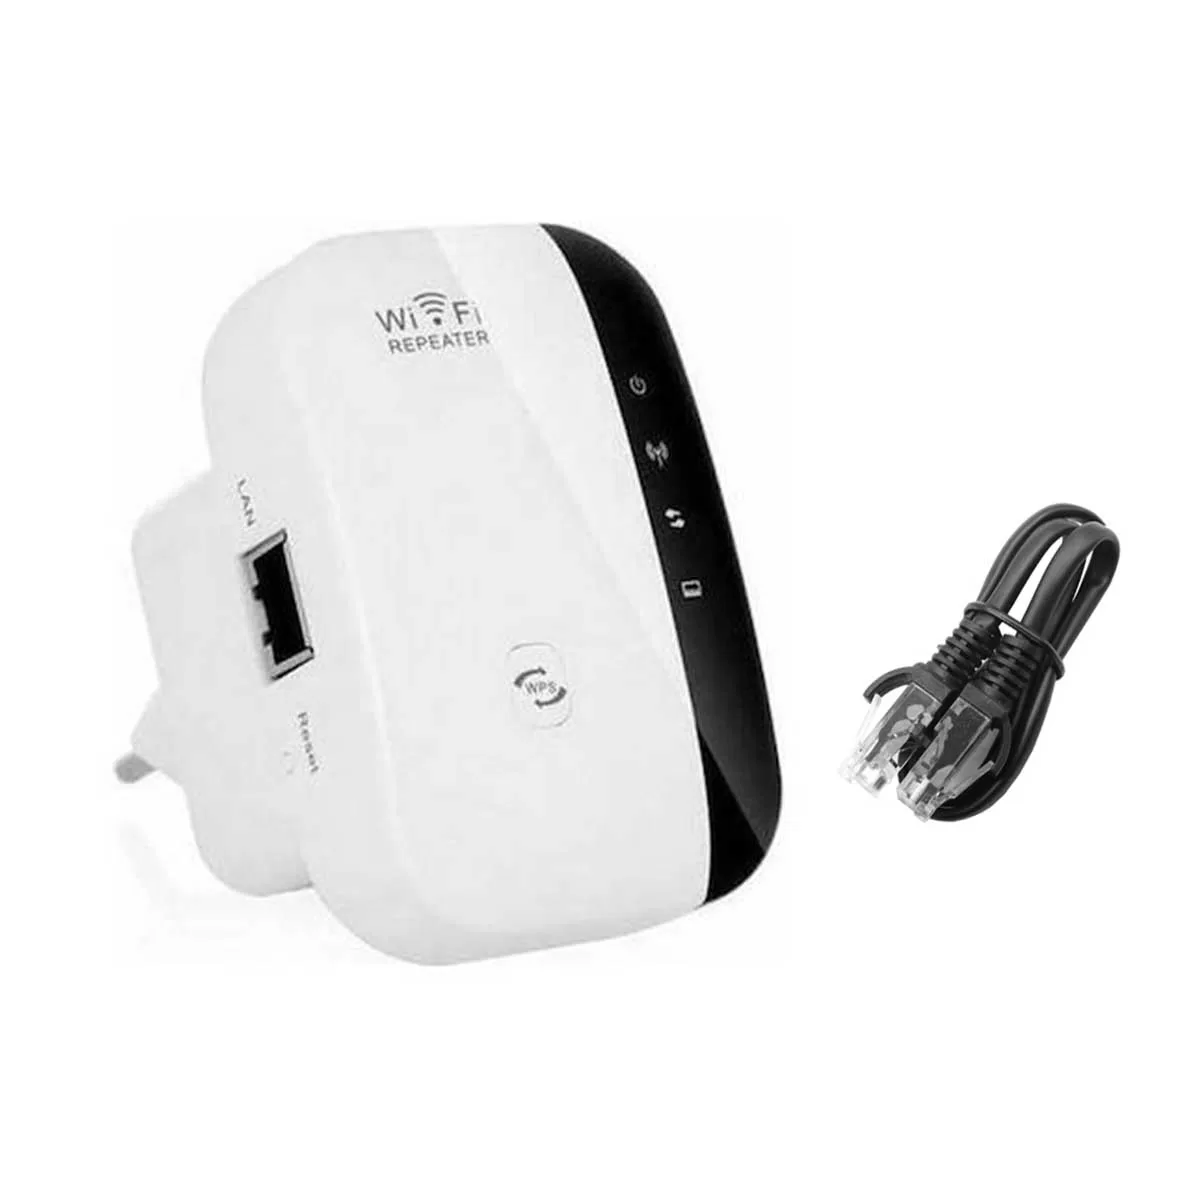 Repeater-N mini WiFi Extender Single Band (2.4GHz) 300Mbps HL18668-112